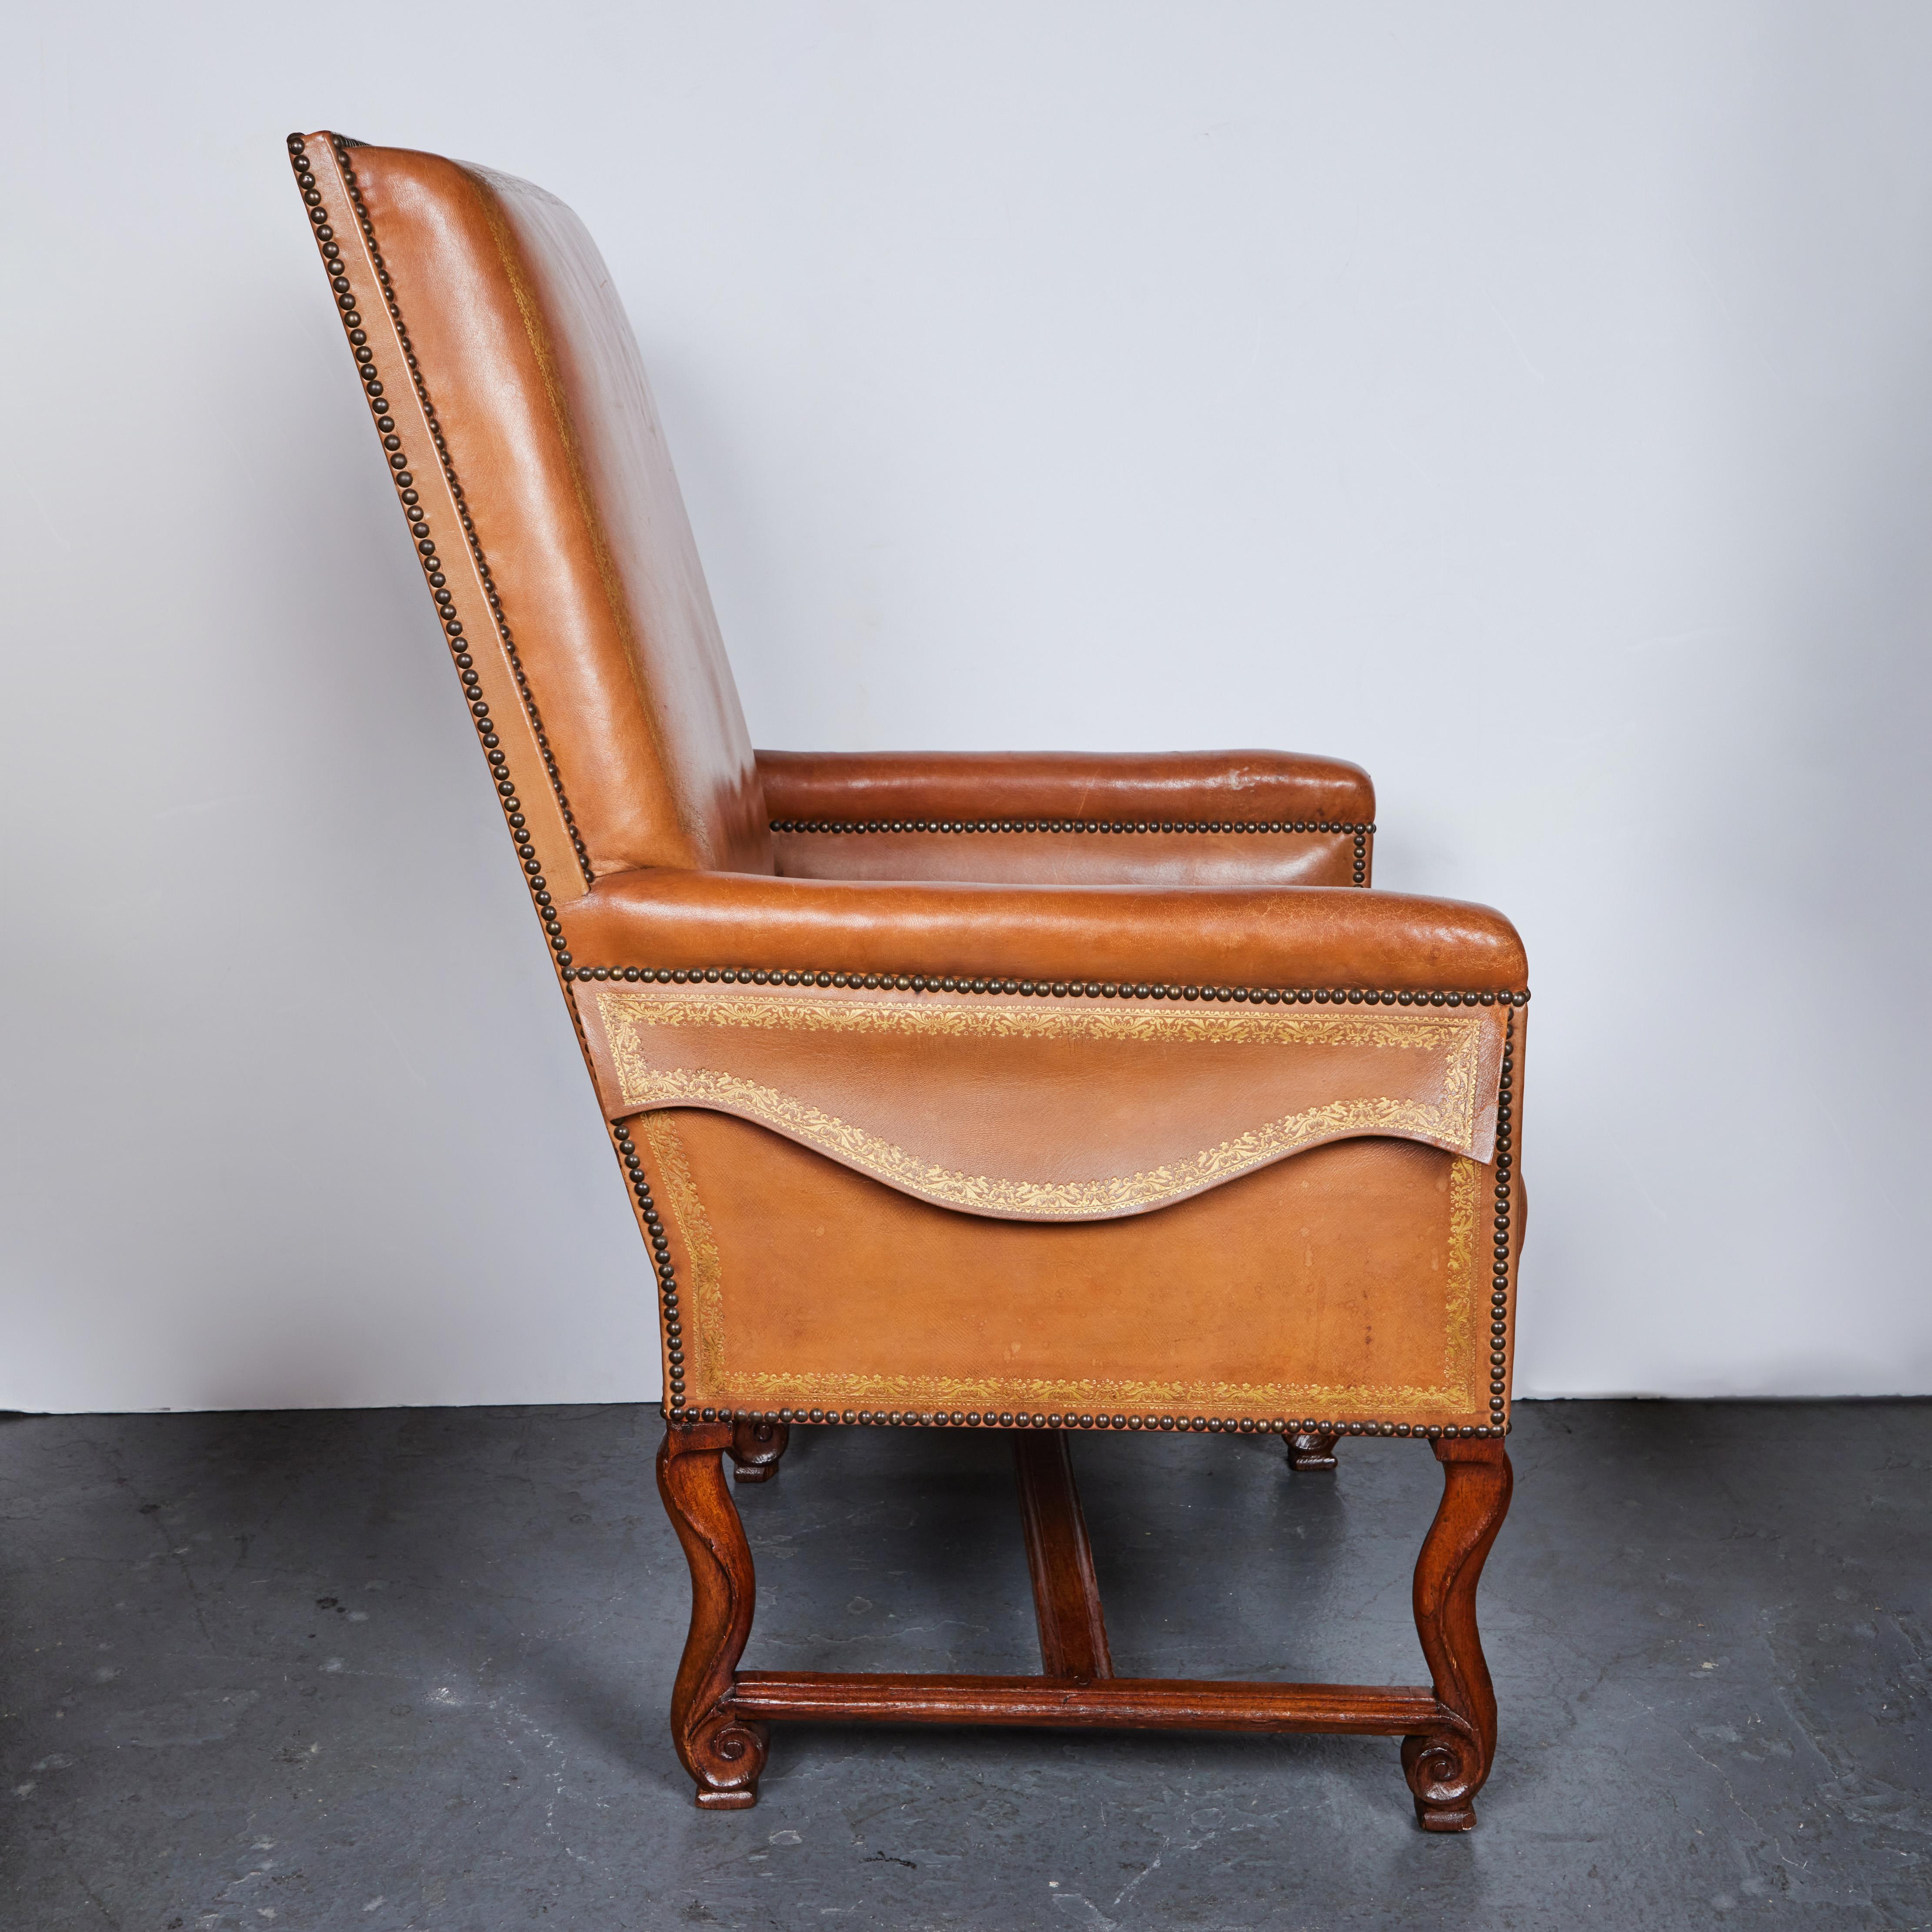 Hand-Carved Antique Walnut and Leather Armchair